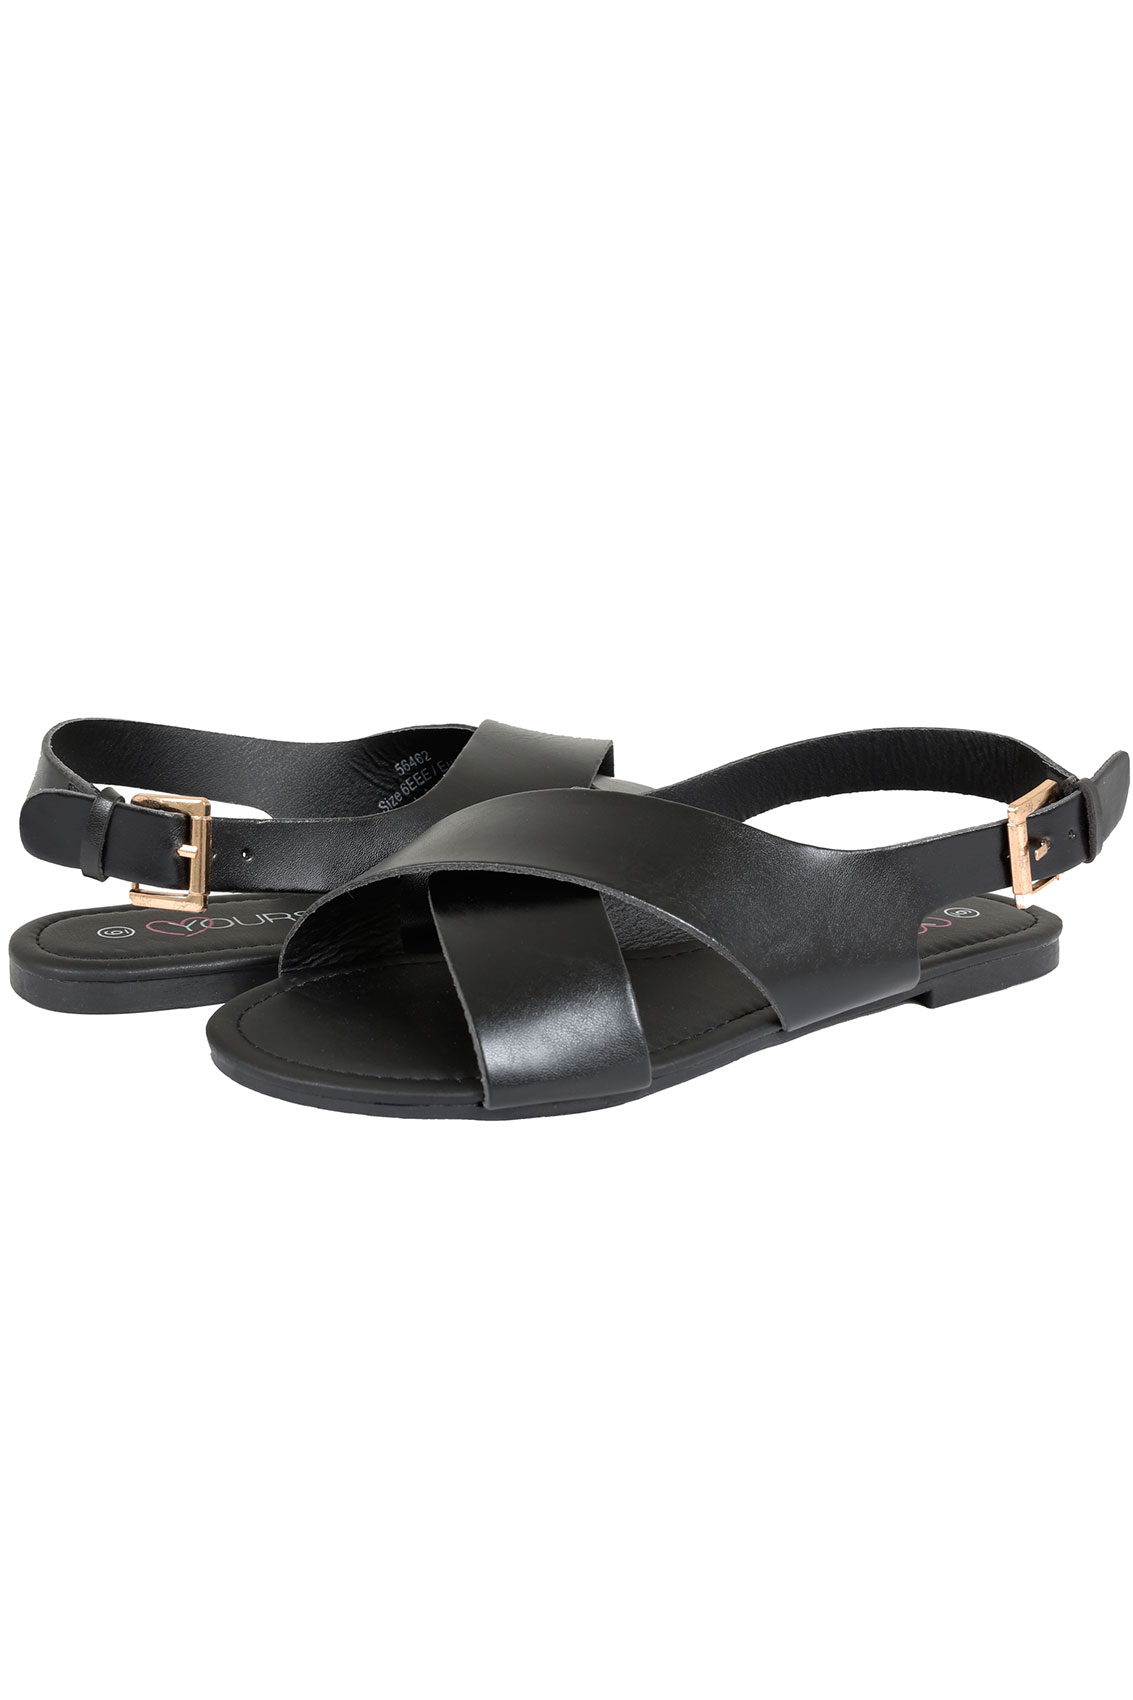 Black Cross Over Flat Sling Back Sandals With Gold Buckle In EEE Fit